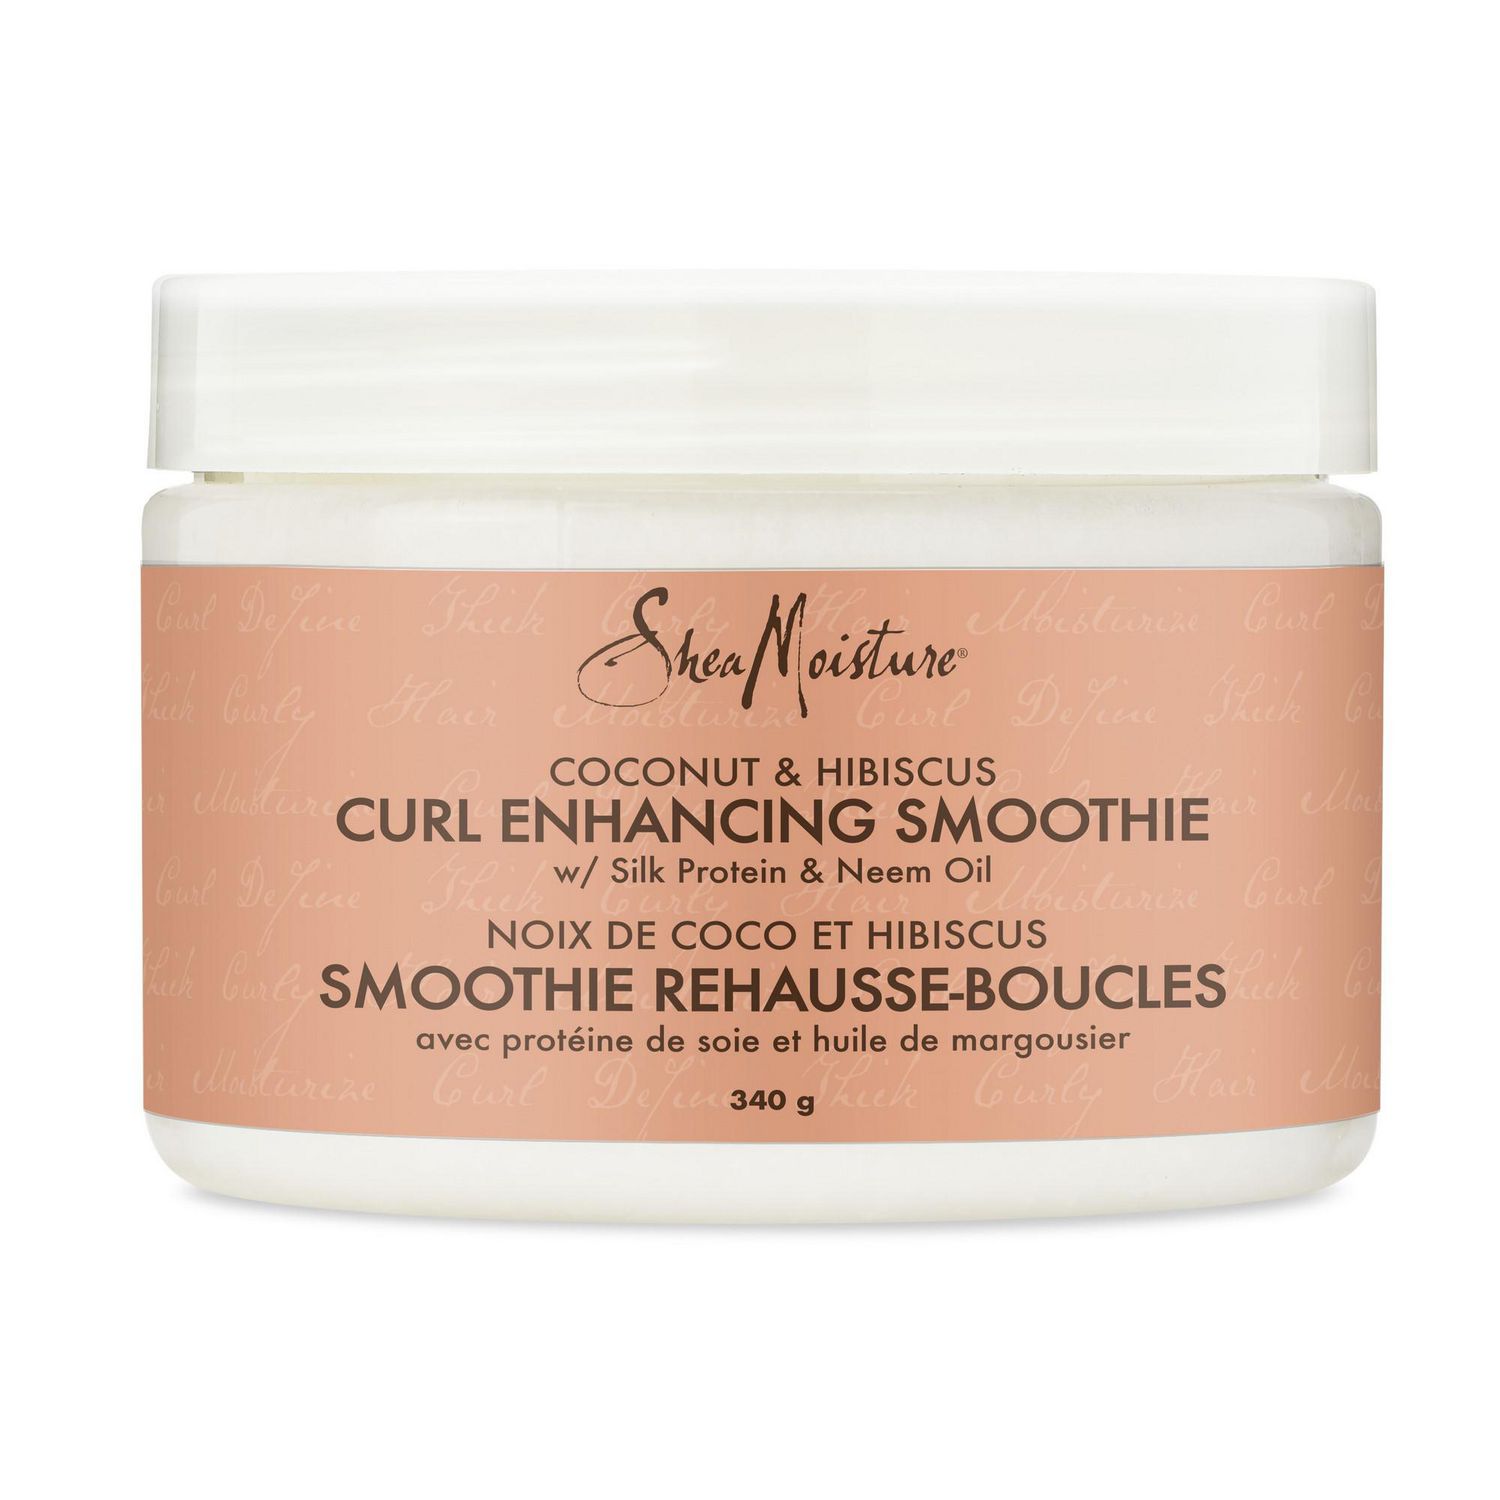 SheaMoisture Coconut & Hibiscus Deep Conditioning Curl Enhancing